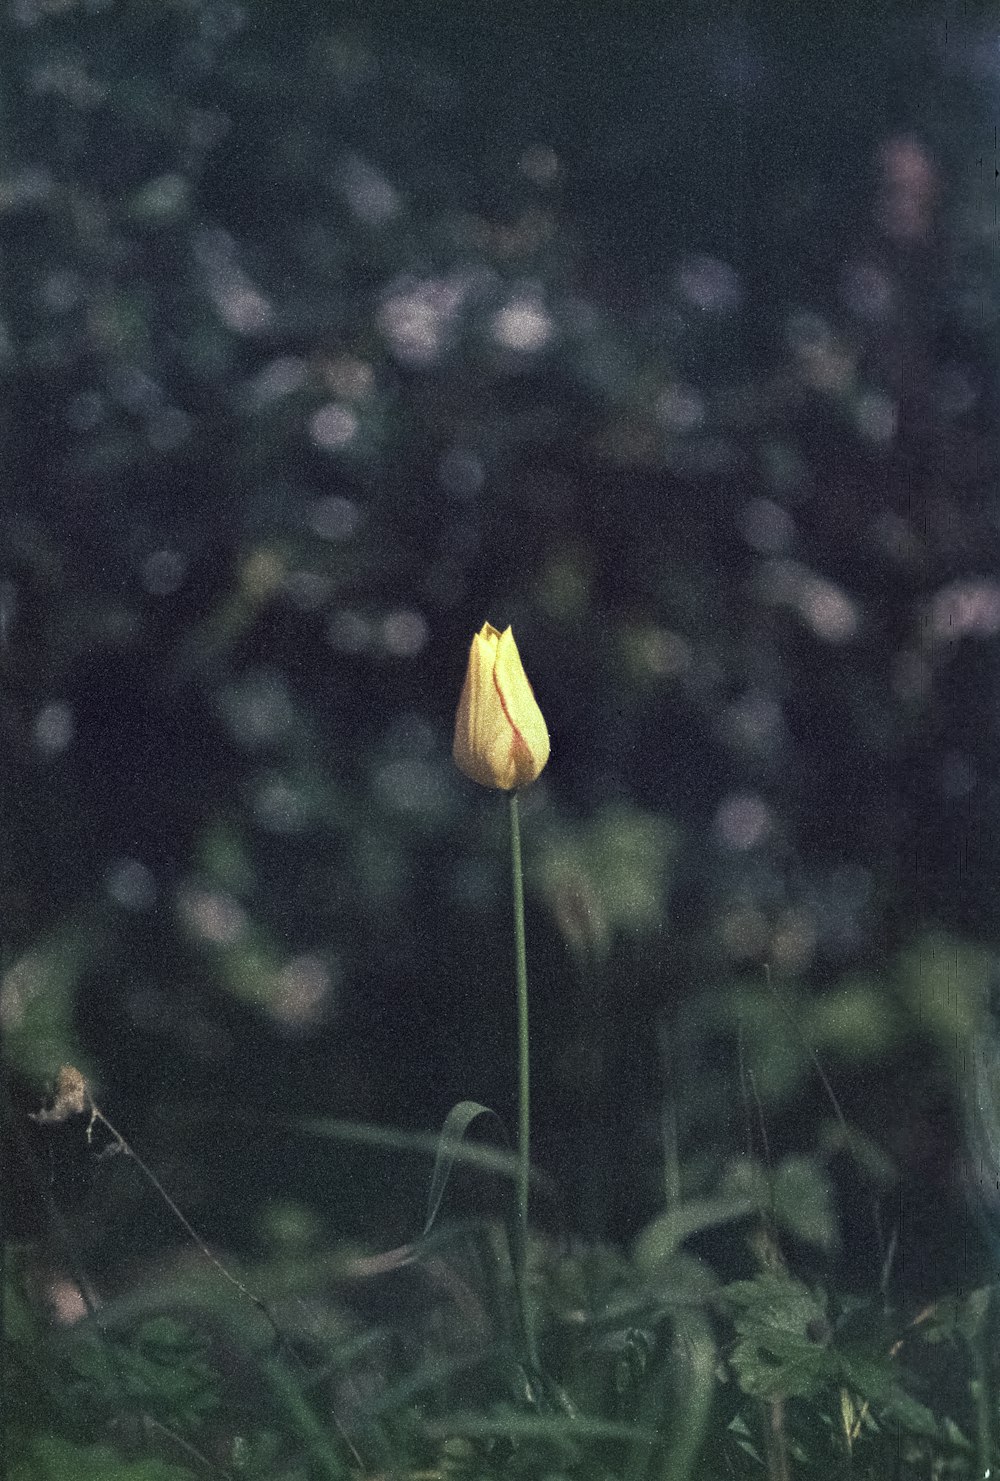 a single yellow flower in a grassy area